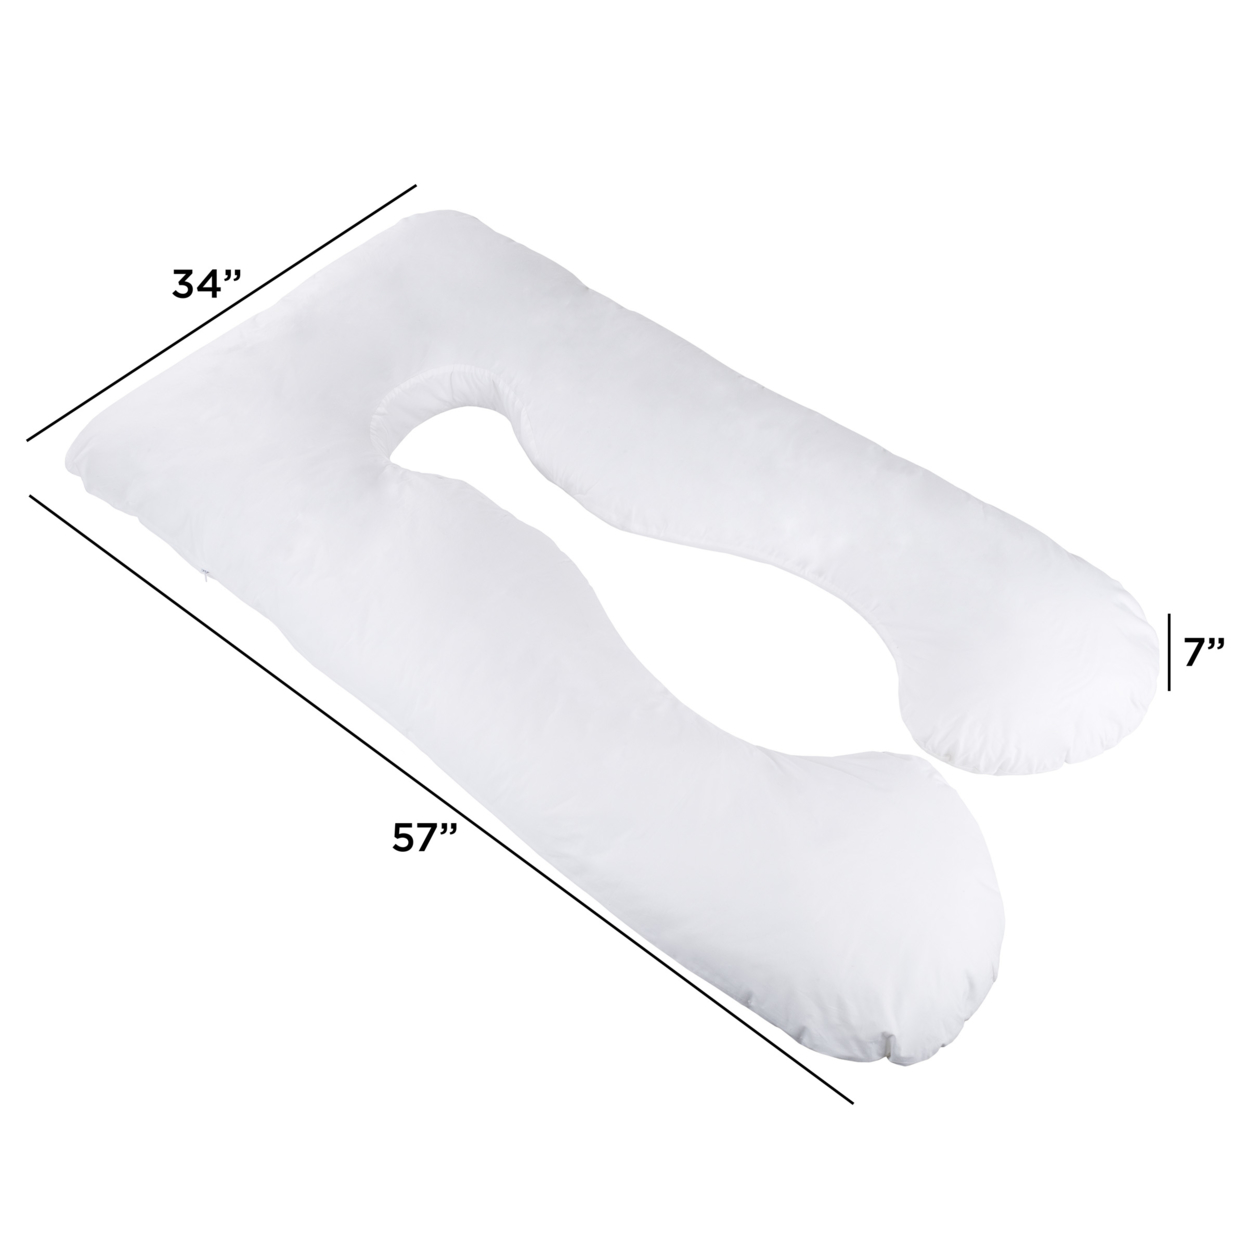 Full Body Pillow- 7 In 1 Pillow With Removeable Cover, Comfortable U-Shape For Support